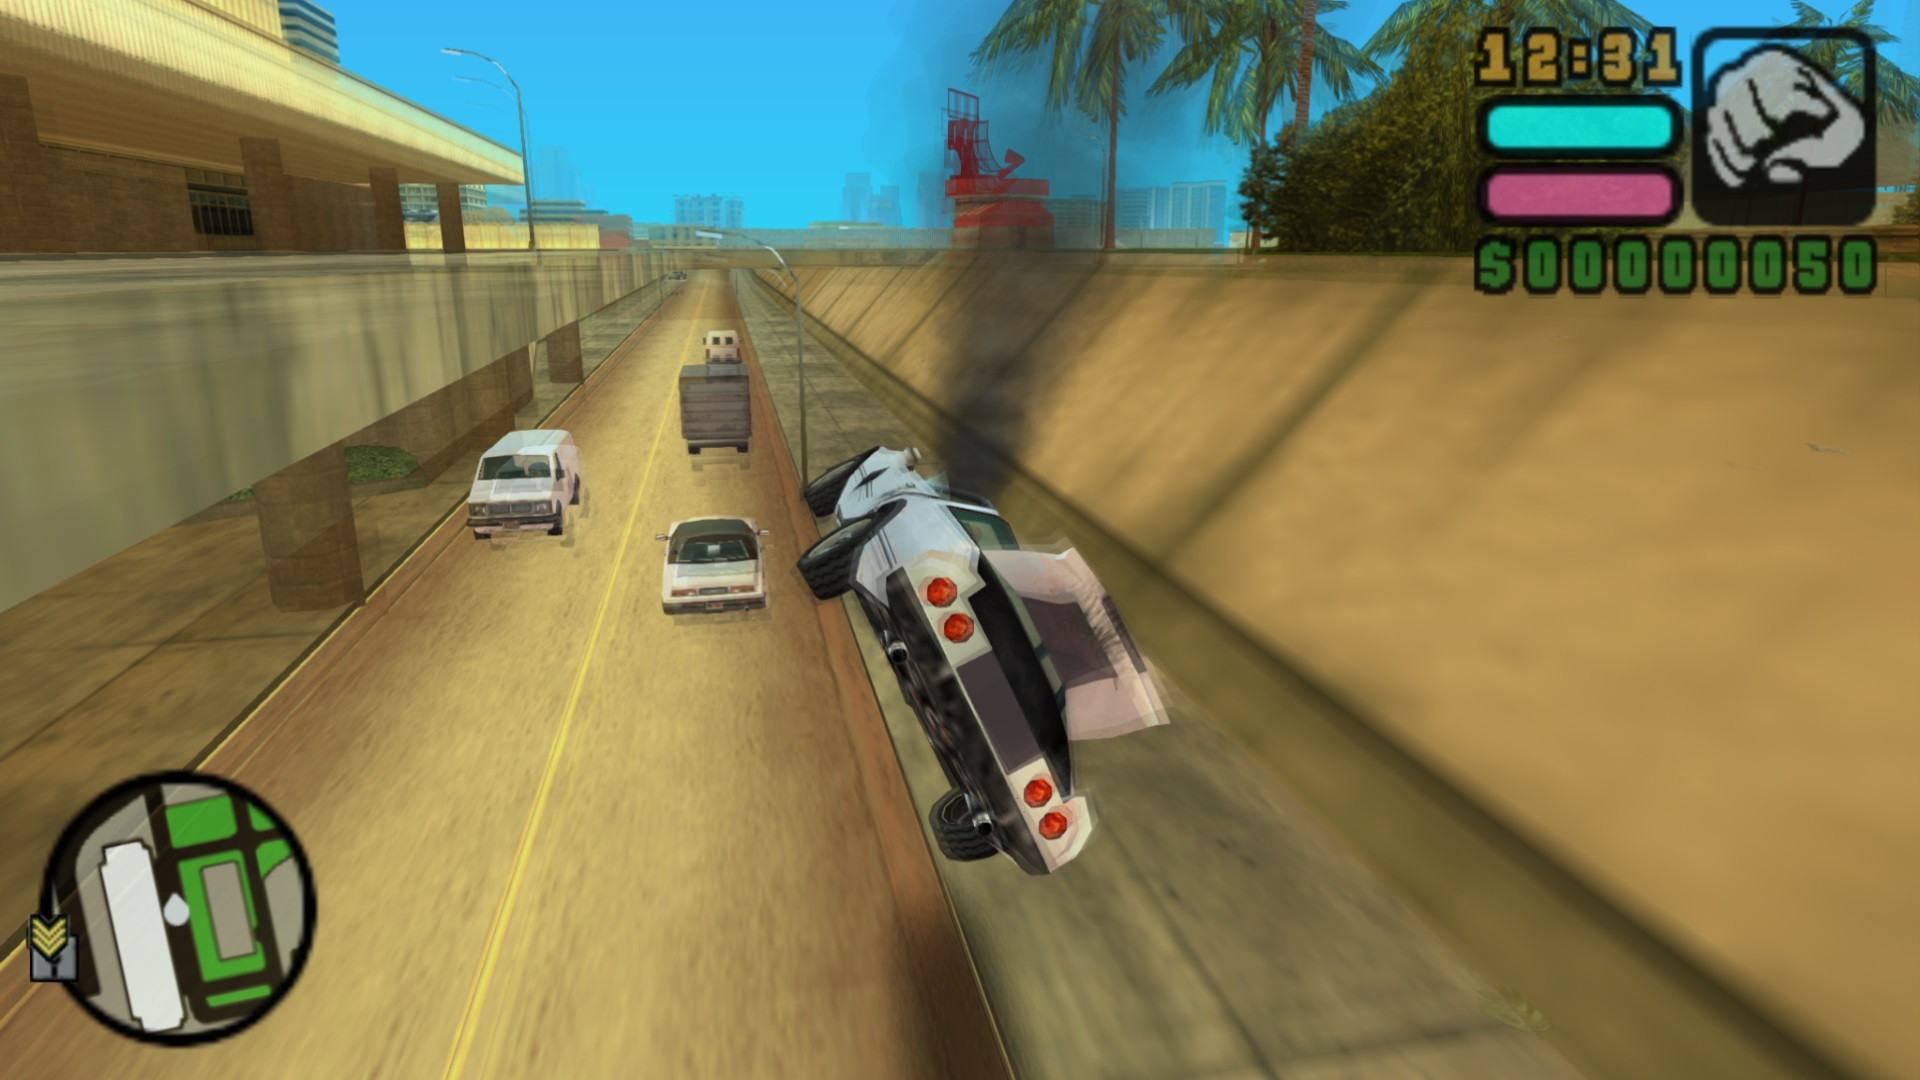 Download gta v iso file for android emulator ppsspp android games